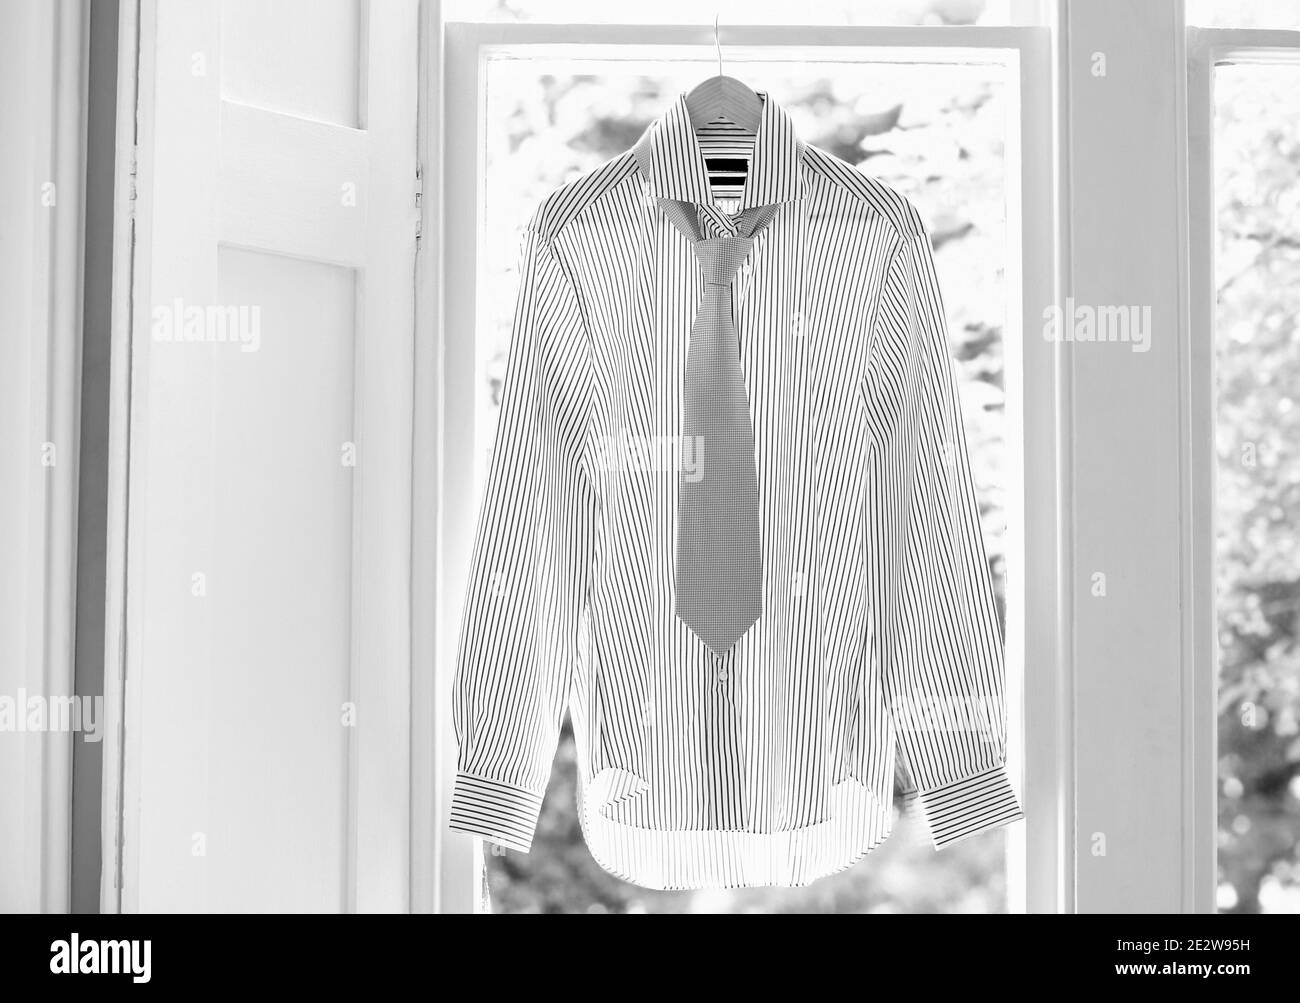 Dress shirt and tie on hanger at domestic window Stock Photo